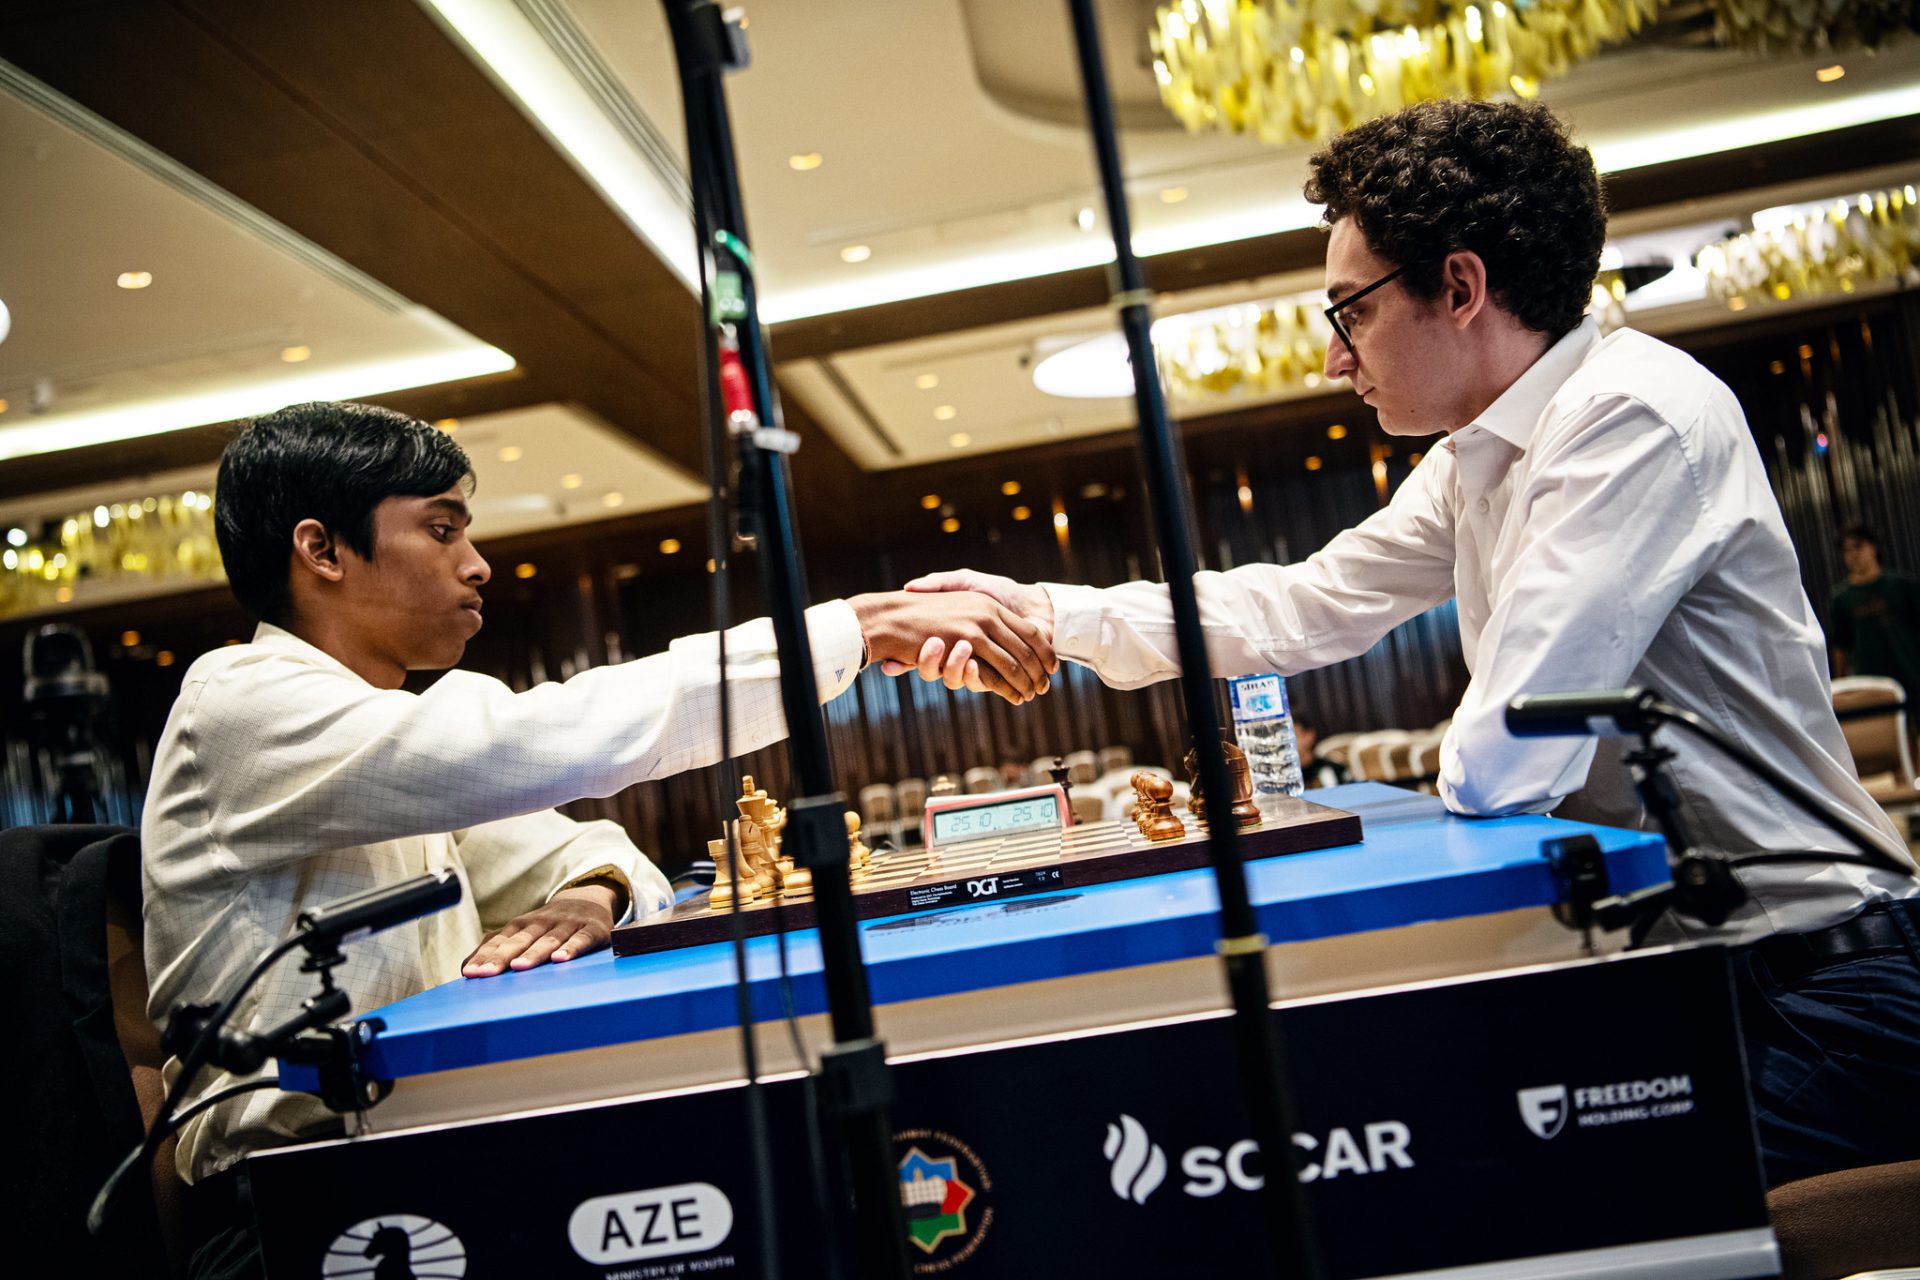 Prag agrees to a draw with Caruana